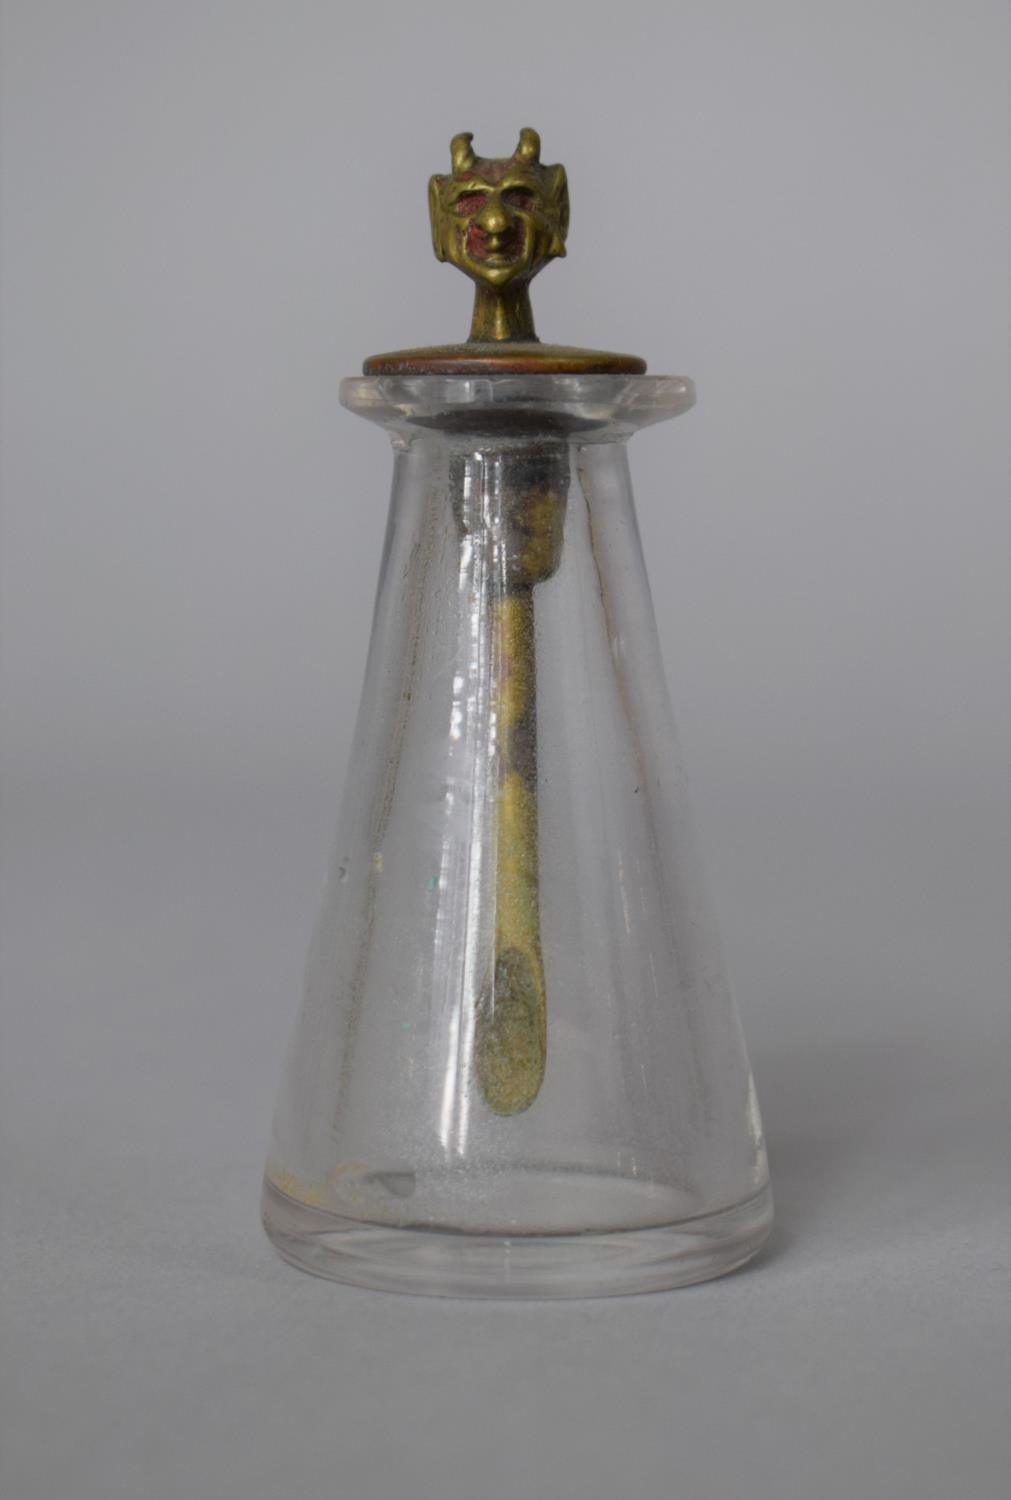 A Small Glass Opium/Snuff Bottle Flask Having Novelty Brass Spoon with Devil's Head Finial, 8cm - Image 2 of 6